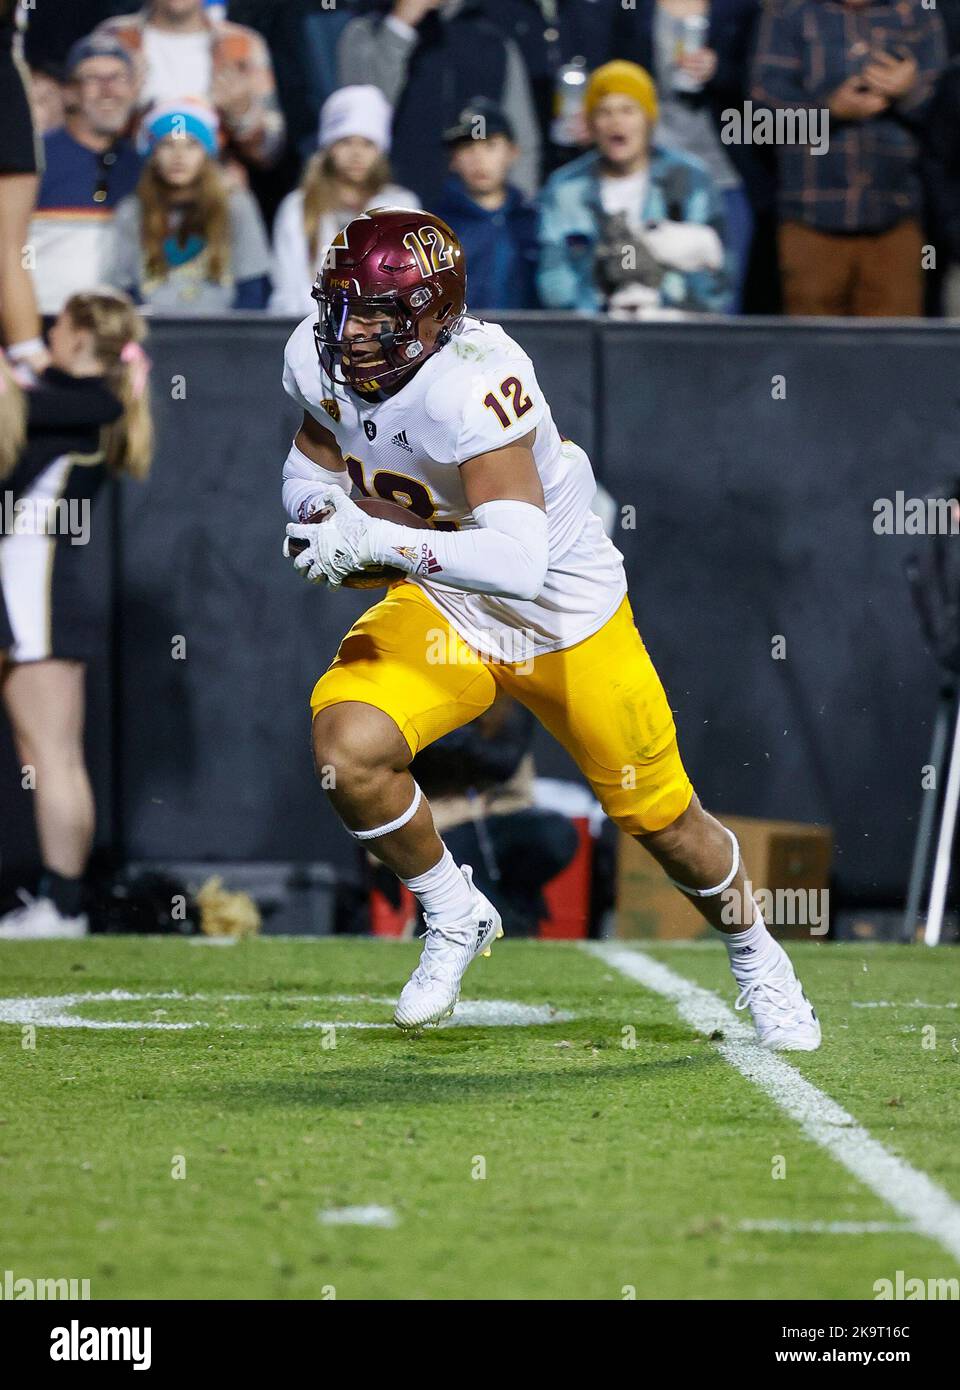 Boulder, CO, USA. 29th Oct, 2022. Arizona State Sun Devils tight end Jalin Conyers (12) looks for the endzone in the football game between Colorado and Arizona State in Boulder, CO. Derek Regensburger/CSM/Alamy Live News Stock Photo